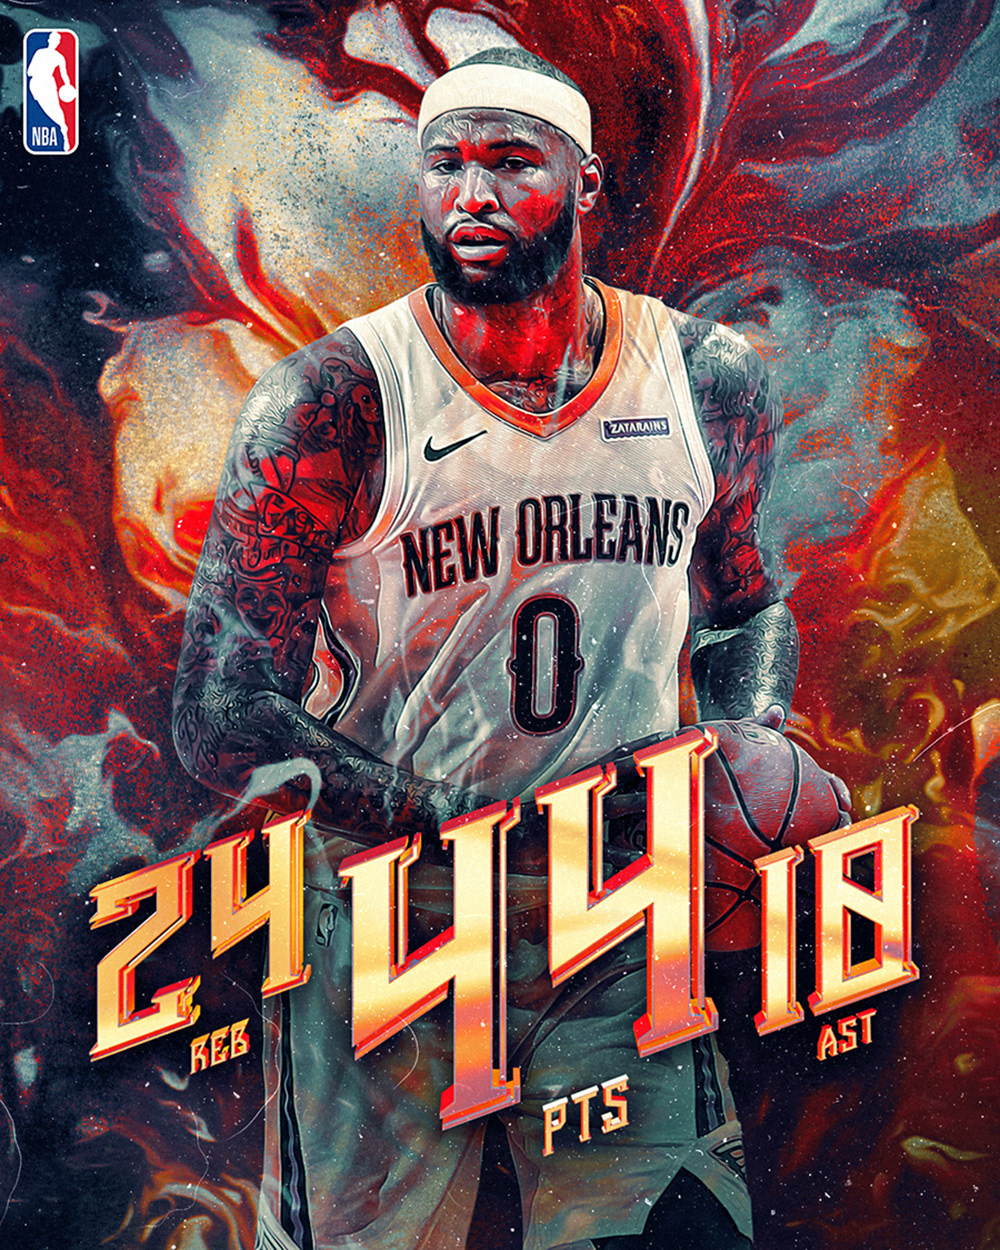 NBA NBA Finals NBA 2K18 LeBron James steph curry Cleveland Cavaliers Golden State Warriors sports ILLUSTRATION  typography  